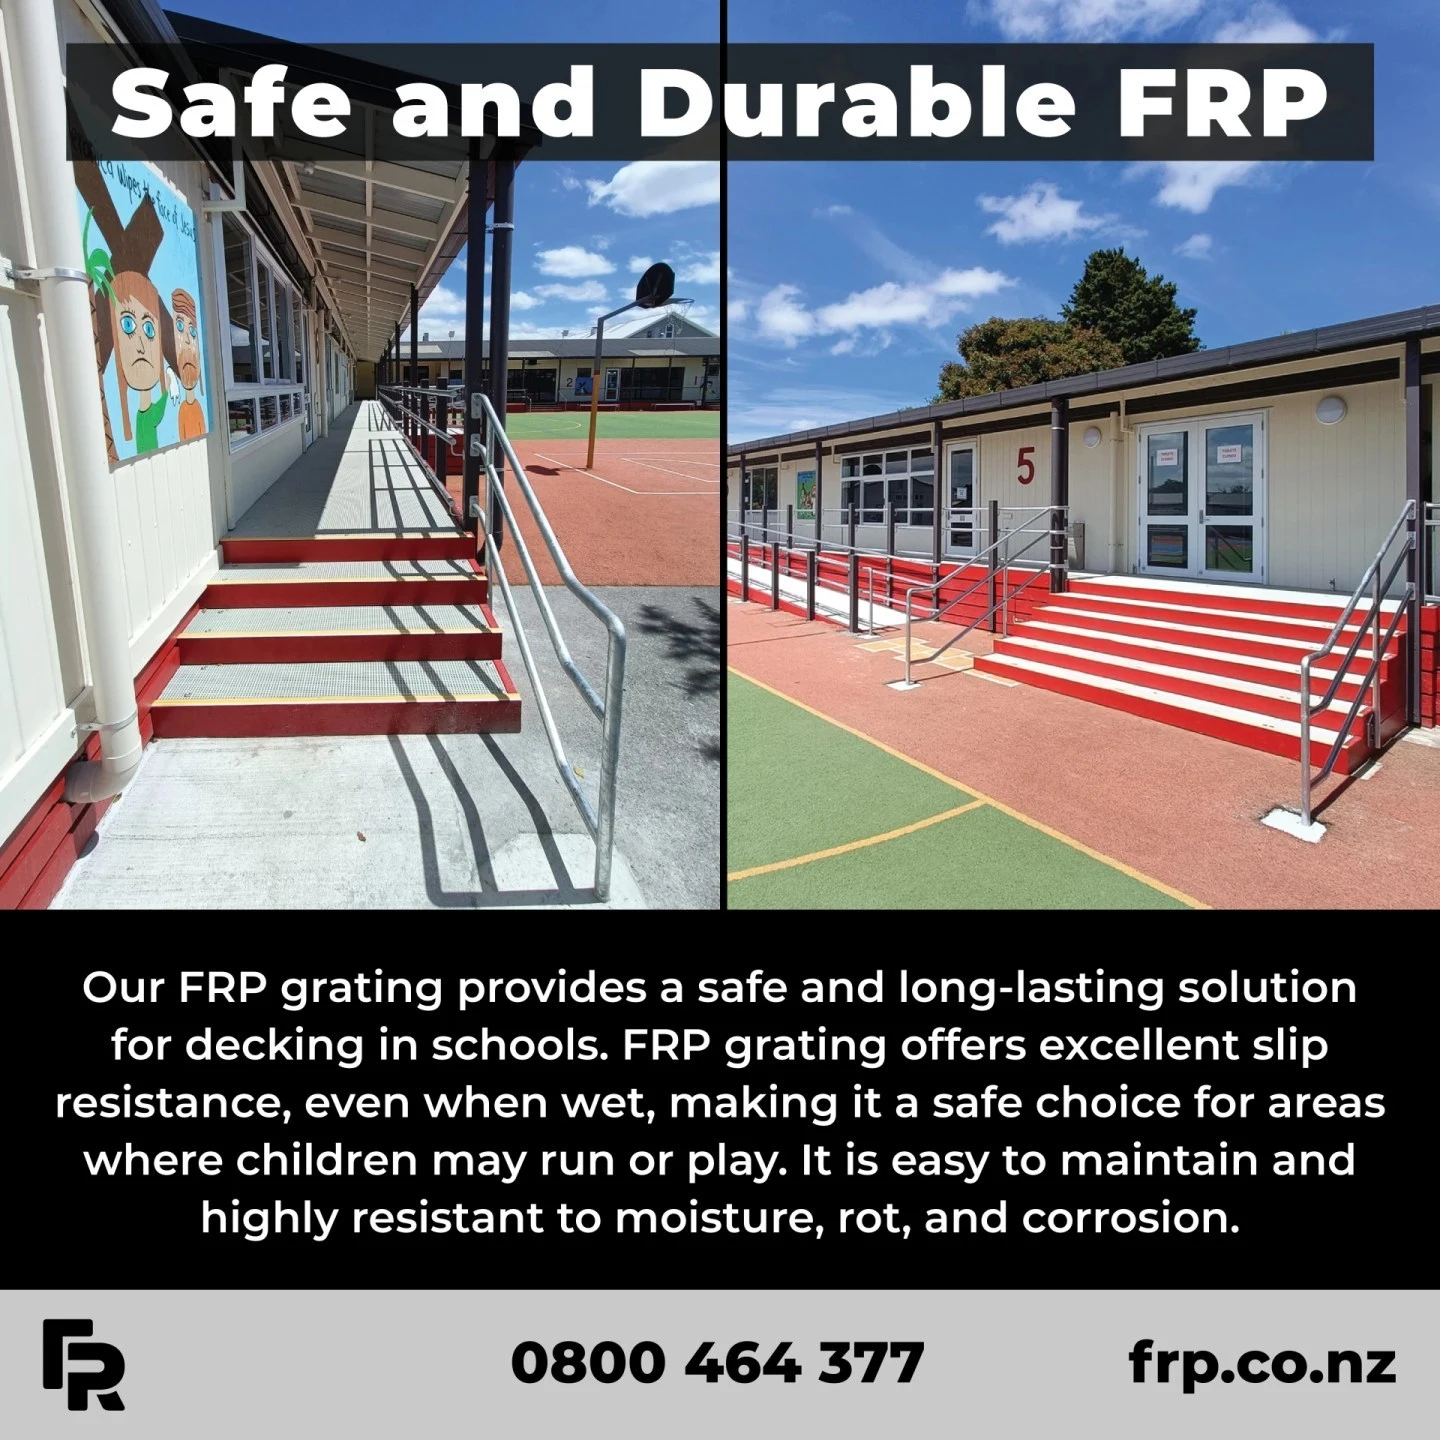 Enhancing safety in schools with durable, non-slip FRP grating! Perfect for walkways, playgrounds, and ramps.

#frp #frpproducts #schoolsafety #frpgrating #nzarchitects #decking #nonslip #walkways #stairways